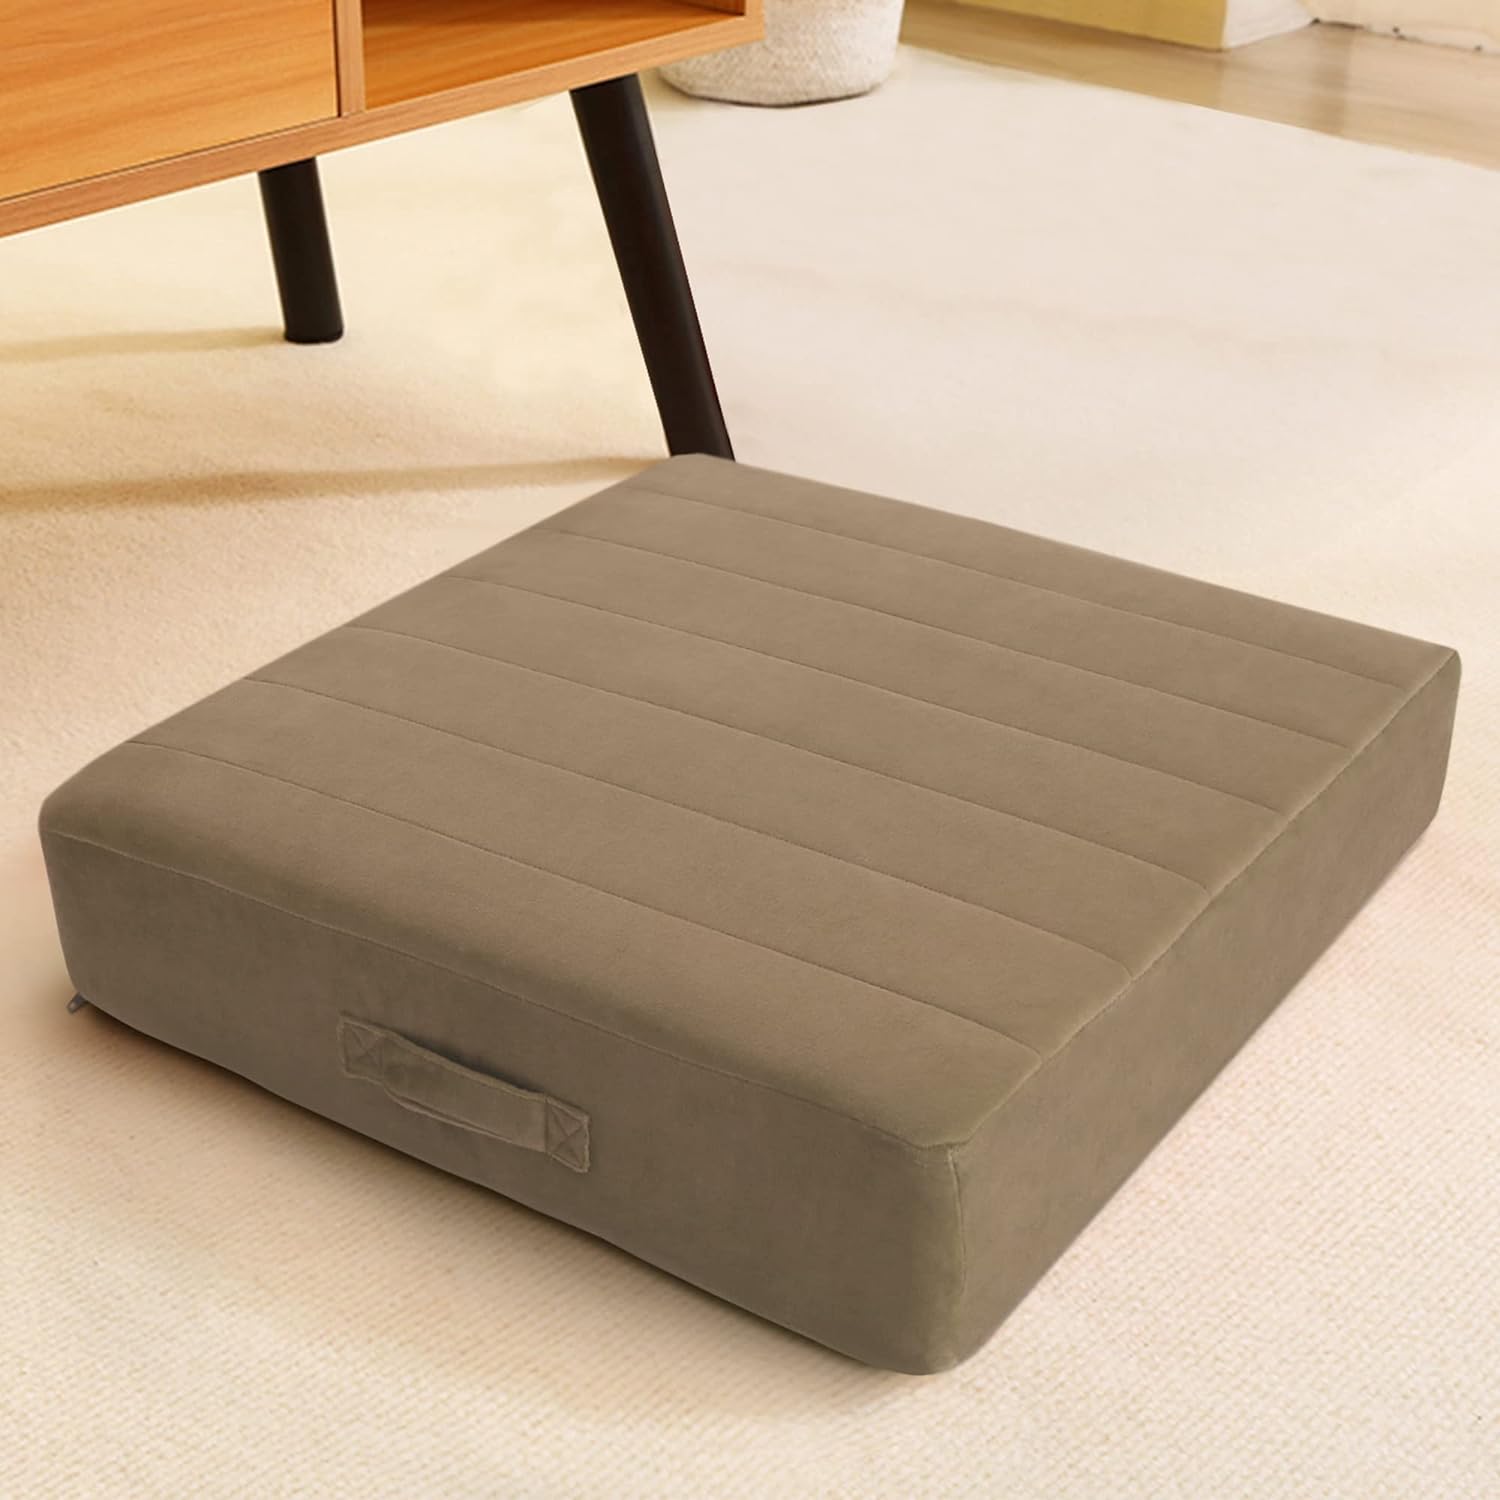 Nice floor pillow. The cover is soft and appears well made. The pillow expanded as expected and fits inside the cover snuggly. It is comfortable, yet firm. Good addition to our family room pillows!